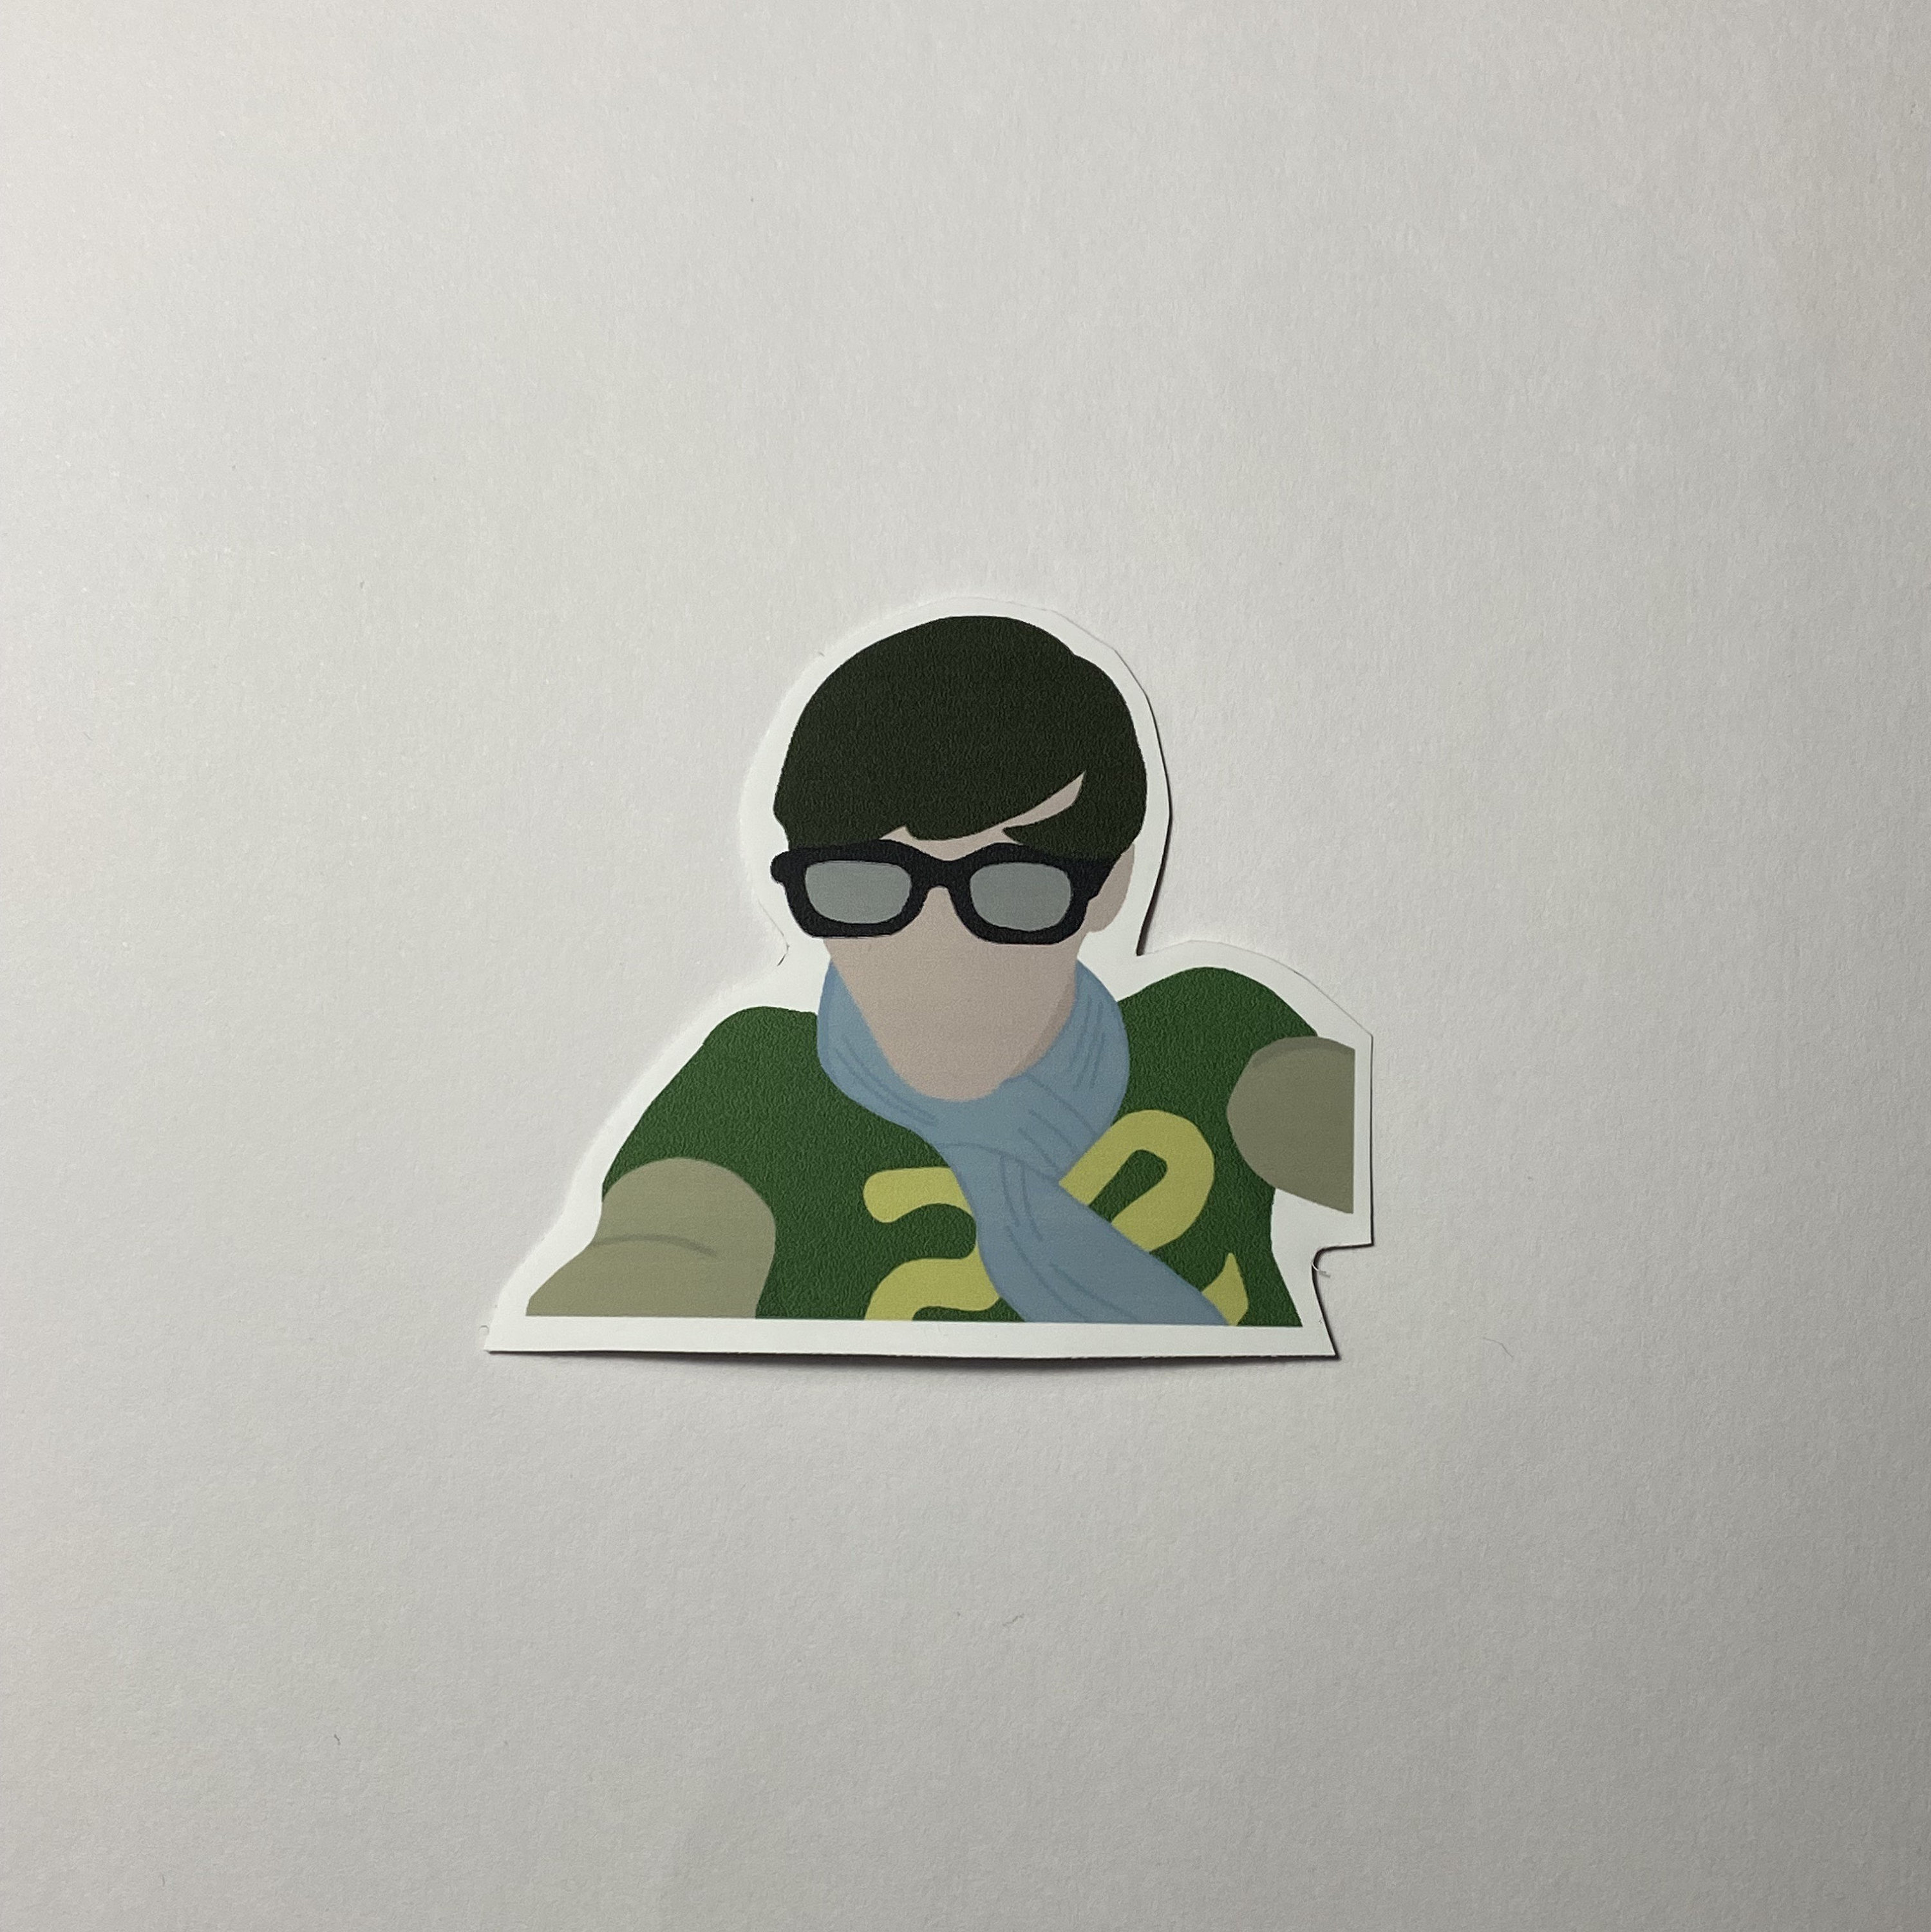 Louis Tomlinson's iconic green hoodie outfit Sticker for Sale by  artbycotton